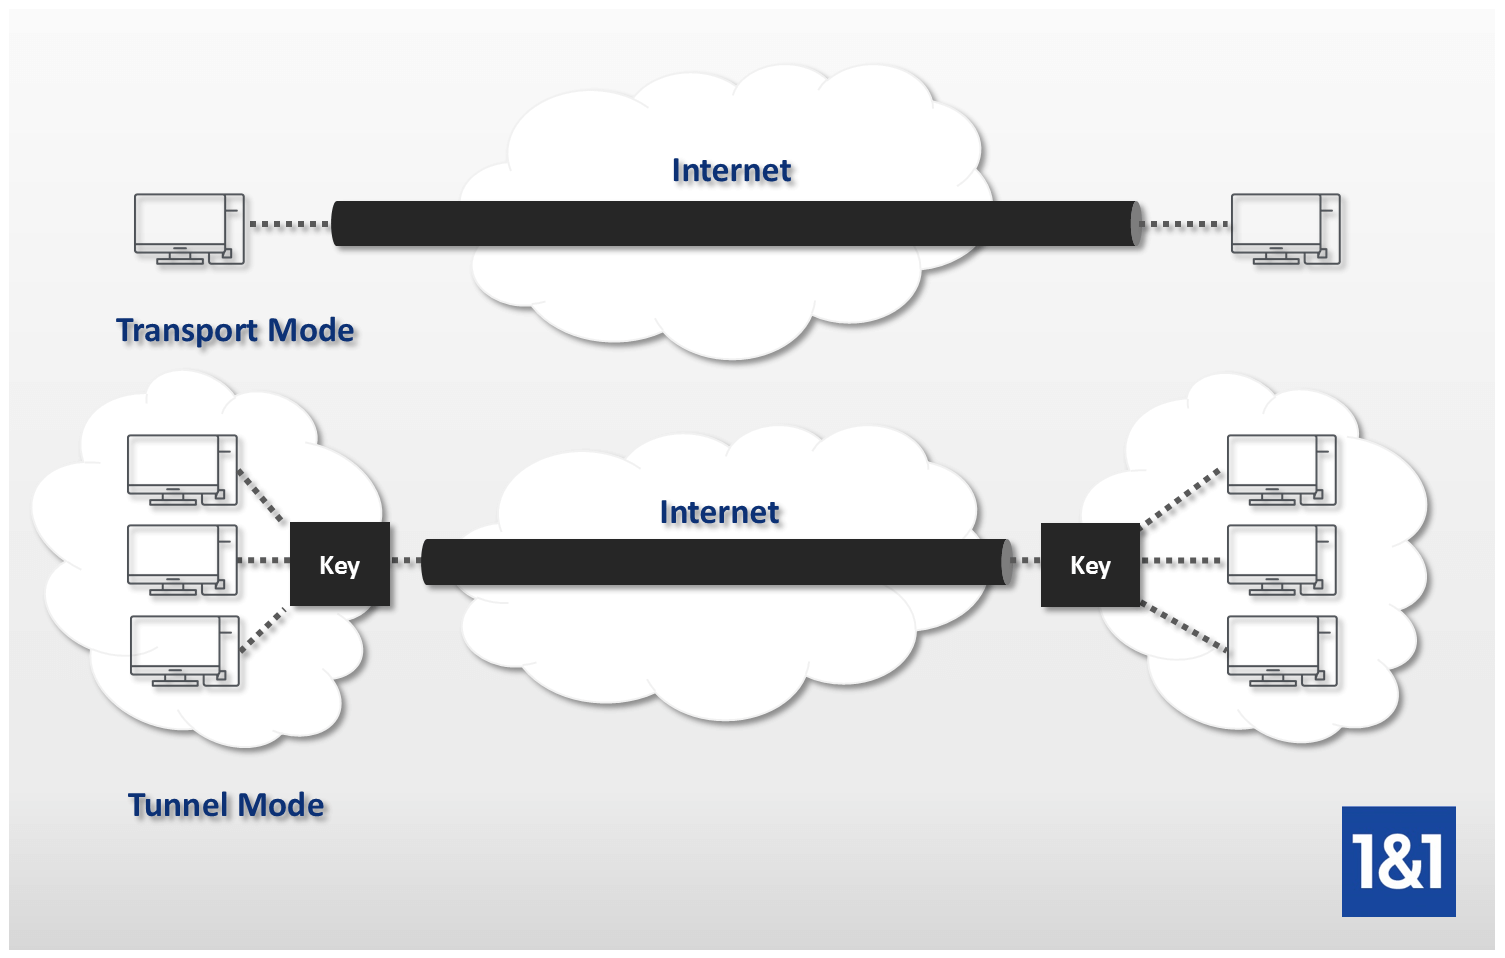 Diagram of tunnel mode and transport mode for making connections with IPSec